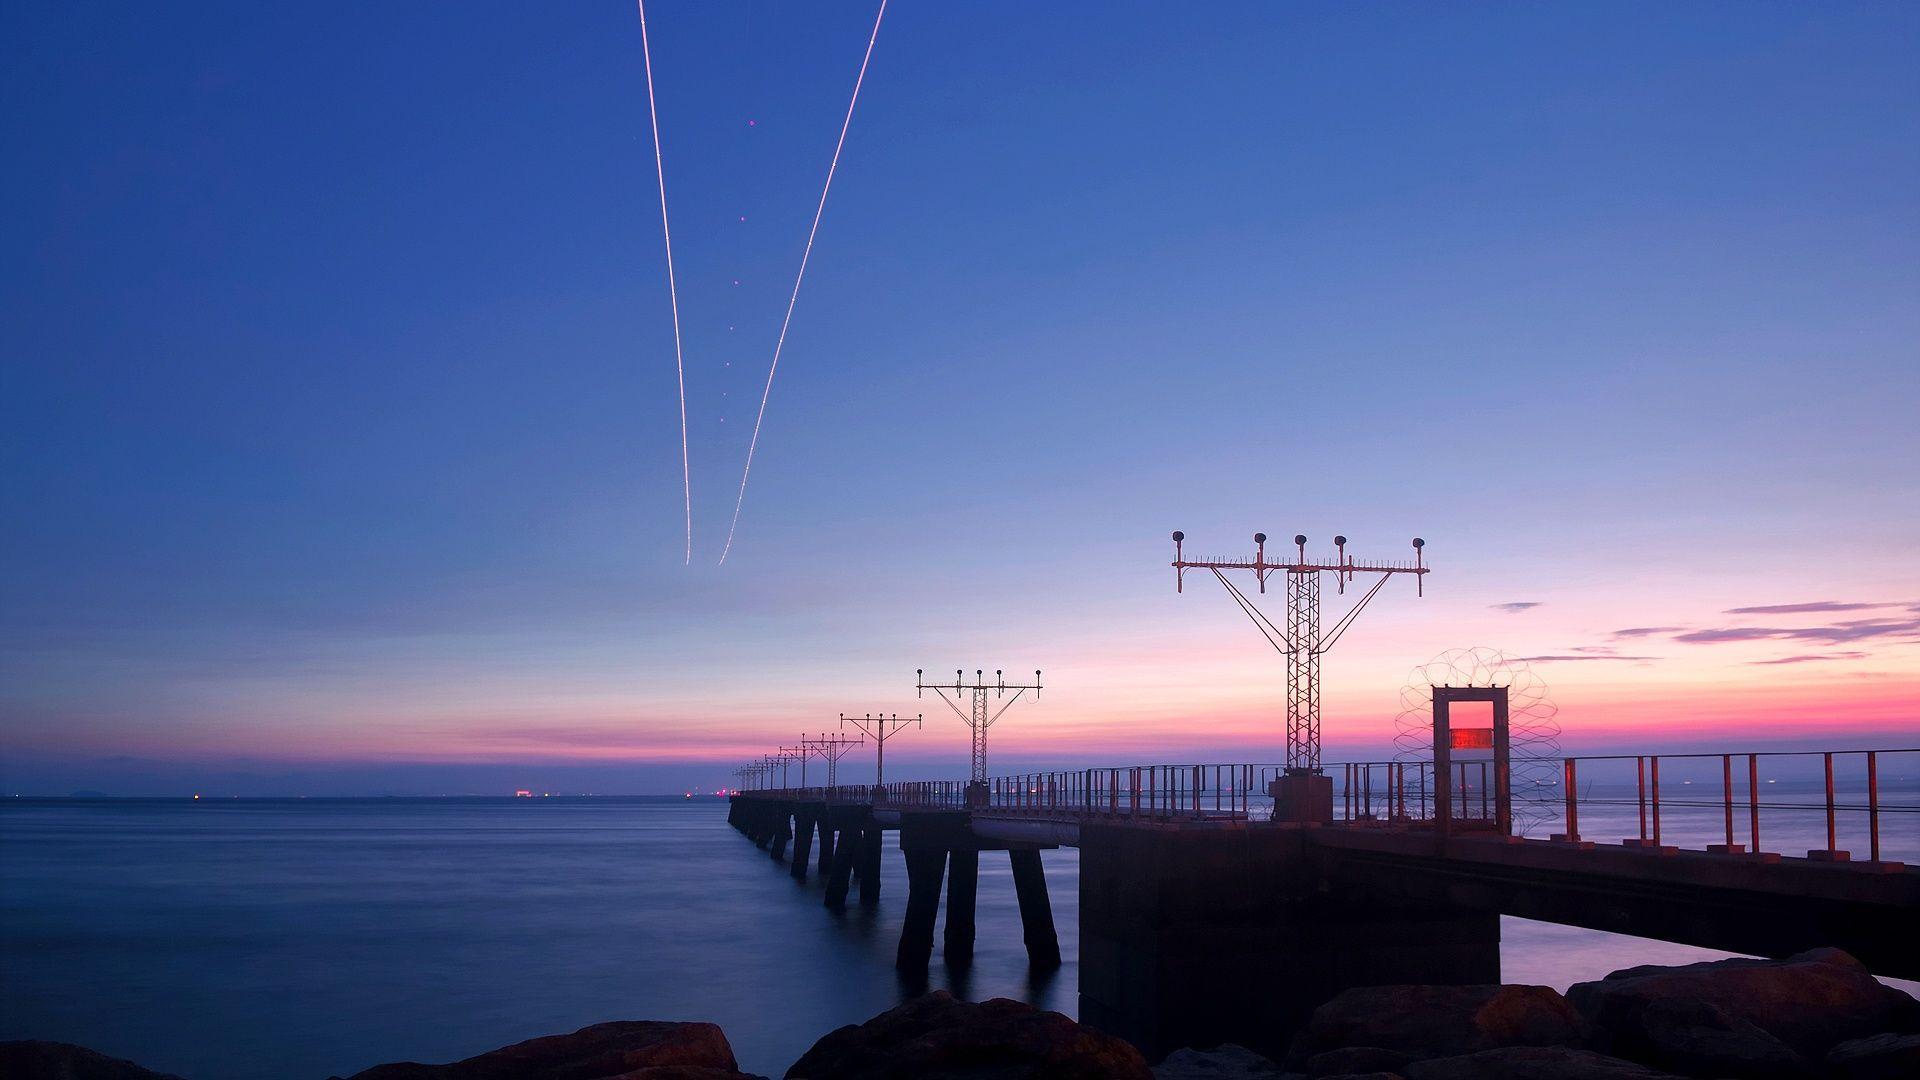 A pier with lights and airplanes in the sky - Sunset, 1920x1080, HD